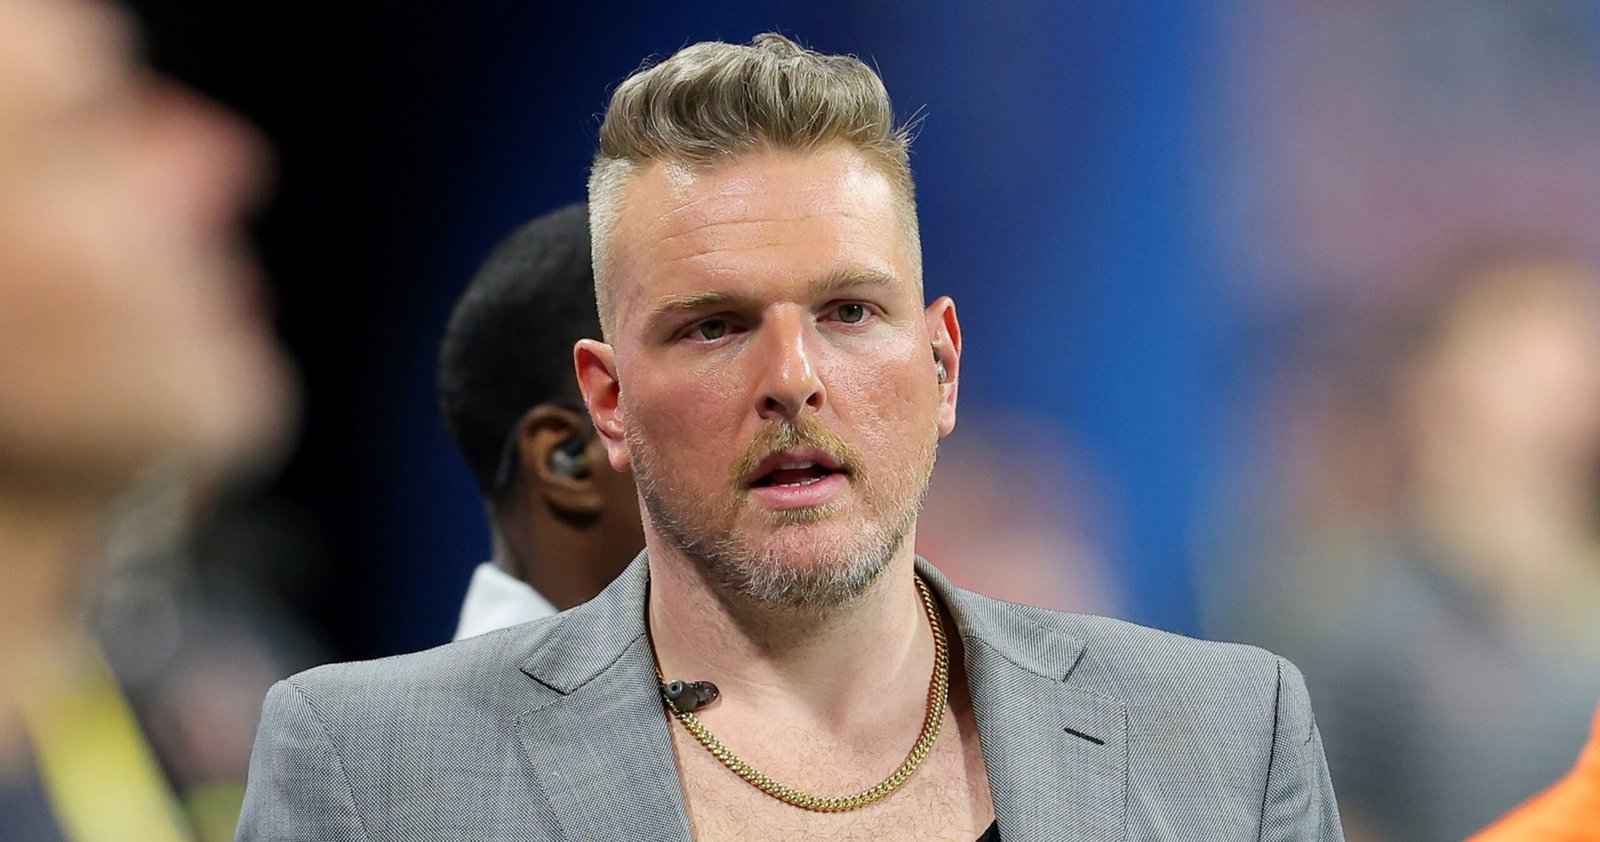 Pat McAfee’s 5-Year ESPN Contract Reportedly Price ‘Round’ $85 Million